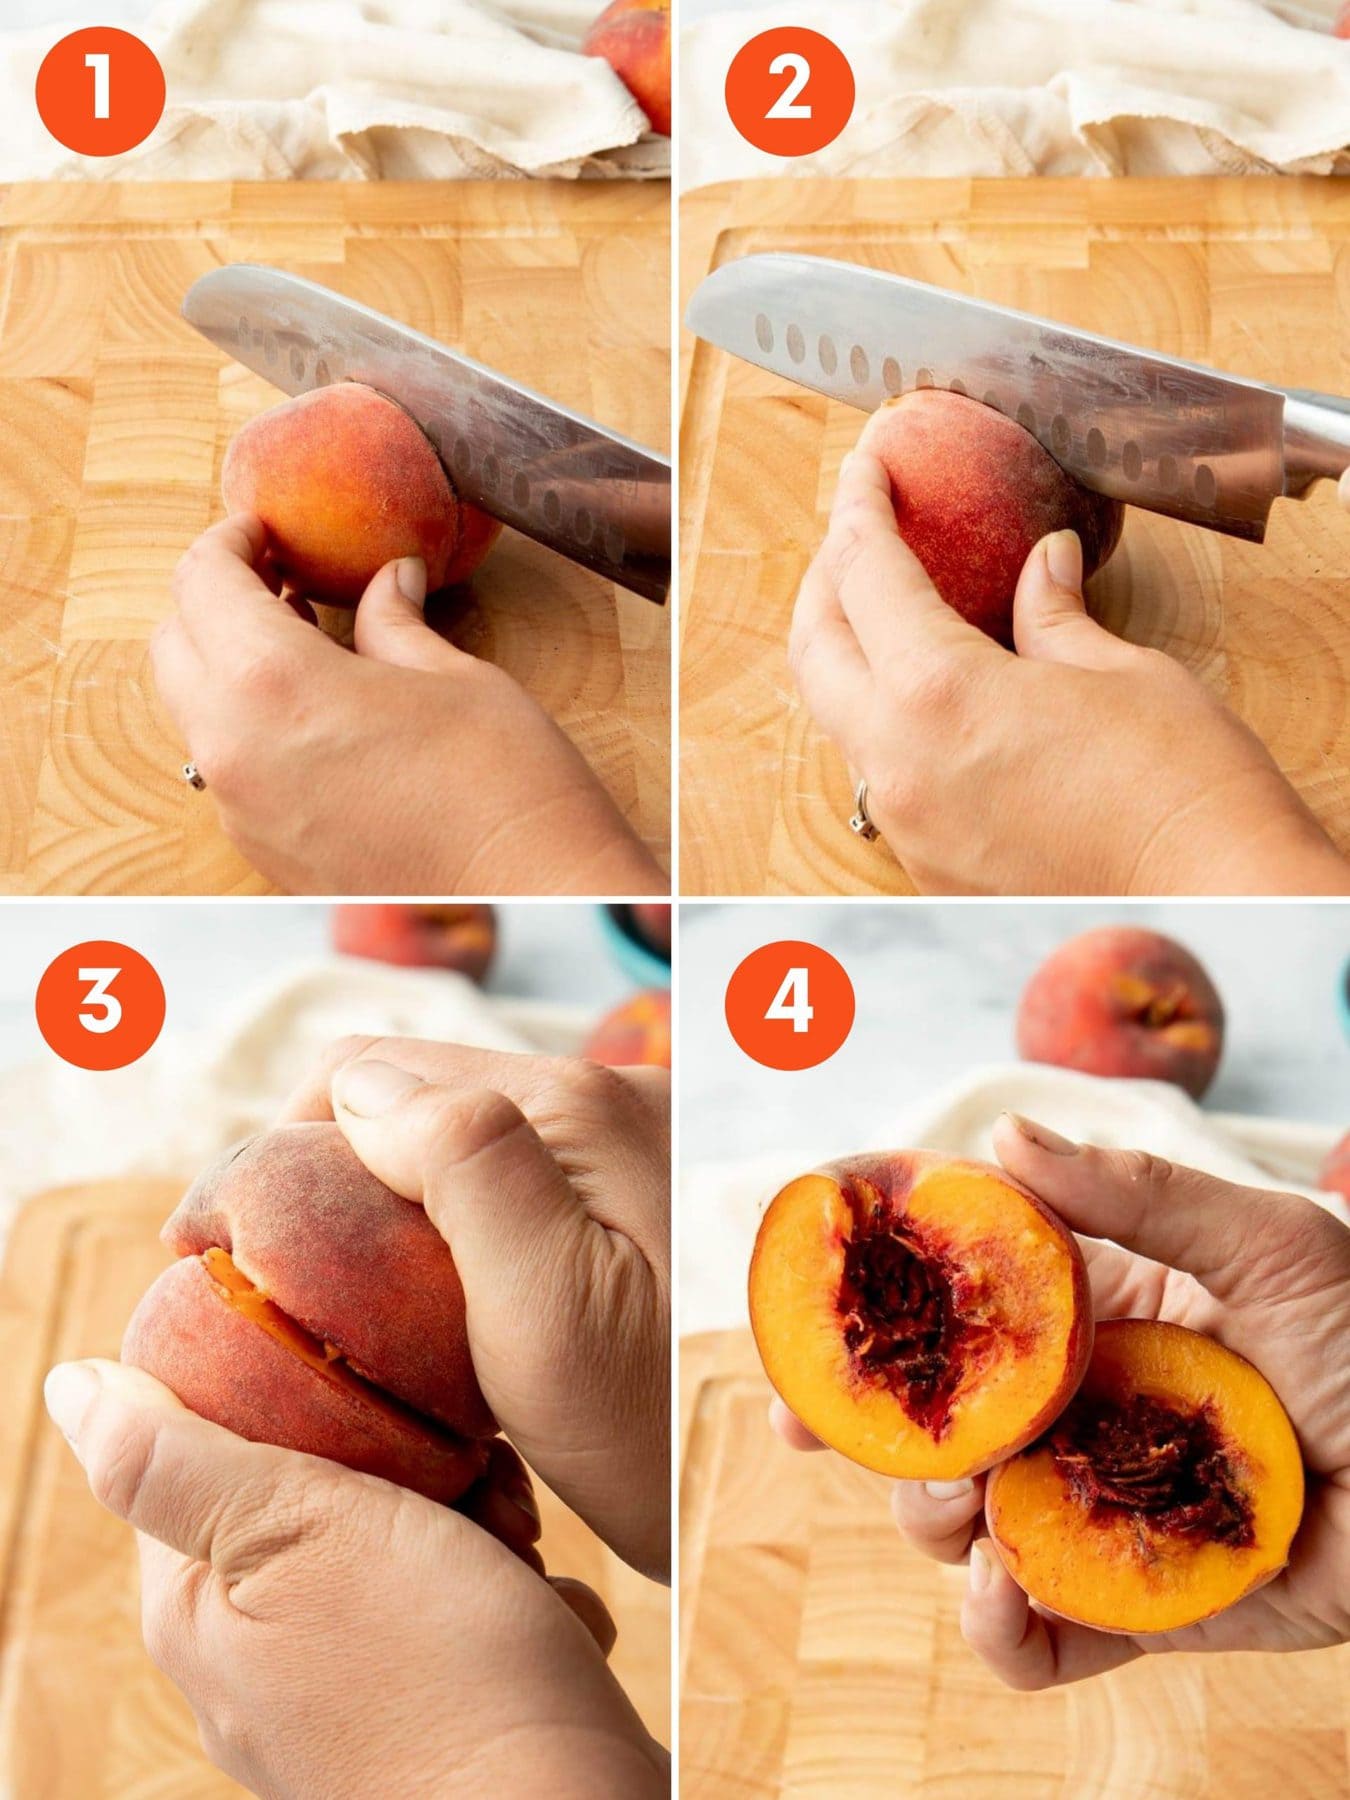 Collage of images showing how to pit a peach in 4 steps.